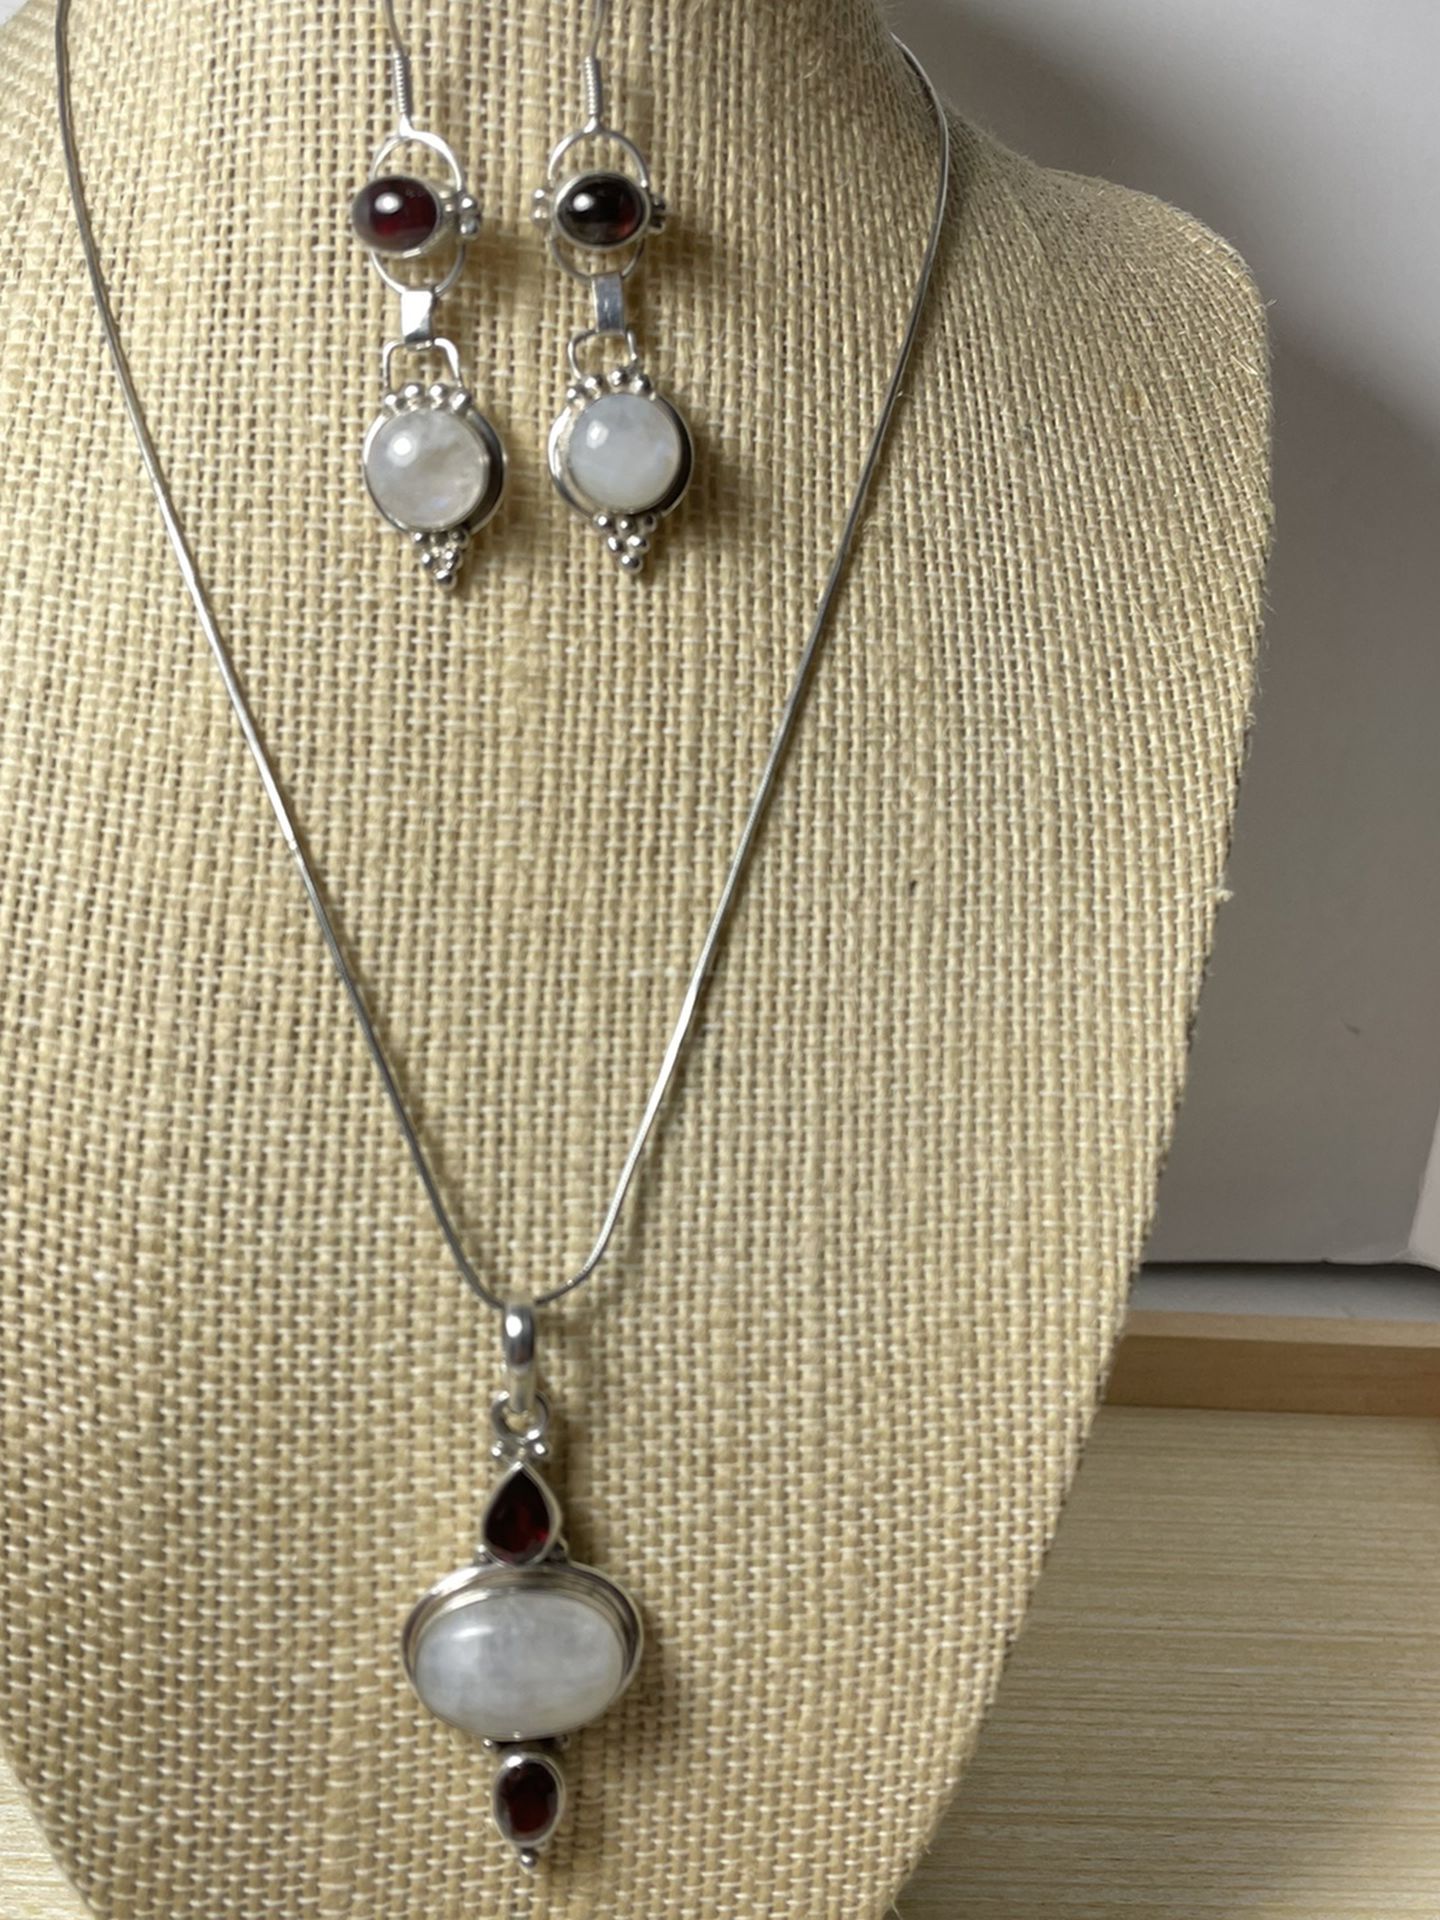 Italy 925 Silver Moonstone And Garnet Stone Necklace &earring 20” Inches